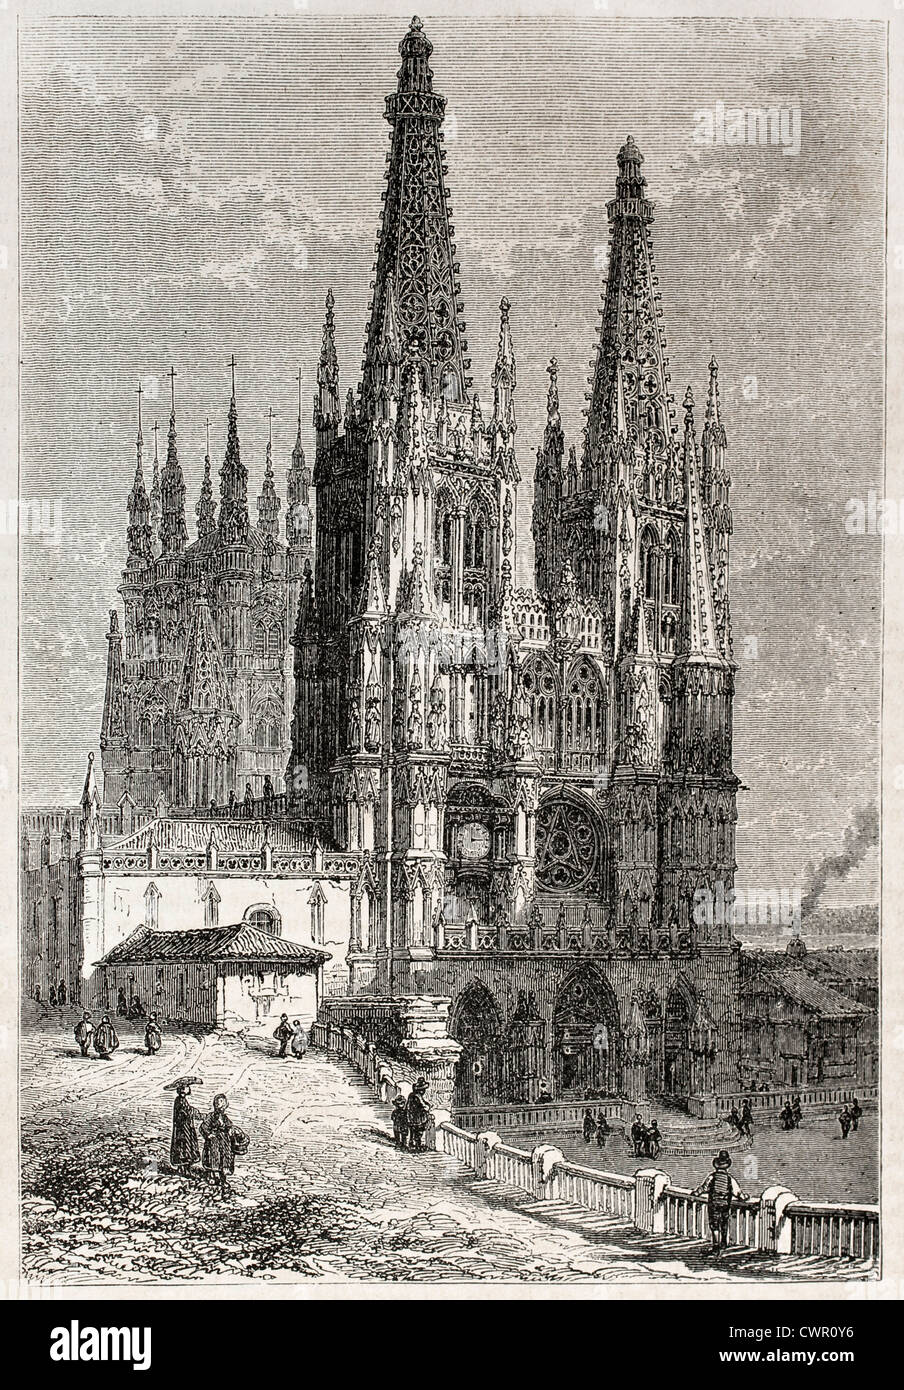 Old illustration of Burgos cathedral, Spain Stock Photo